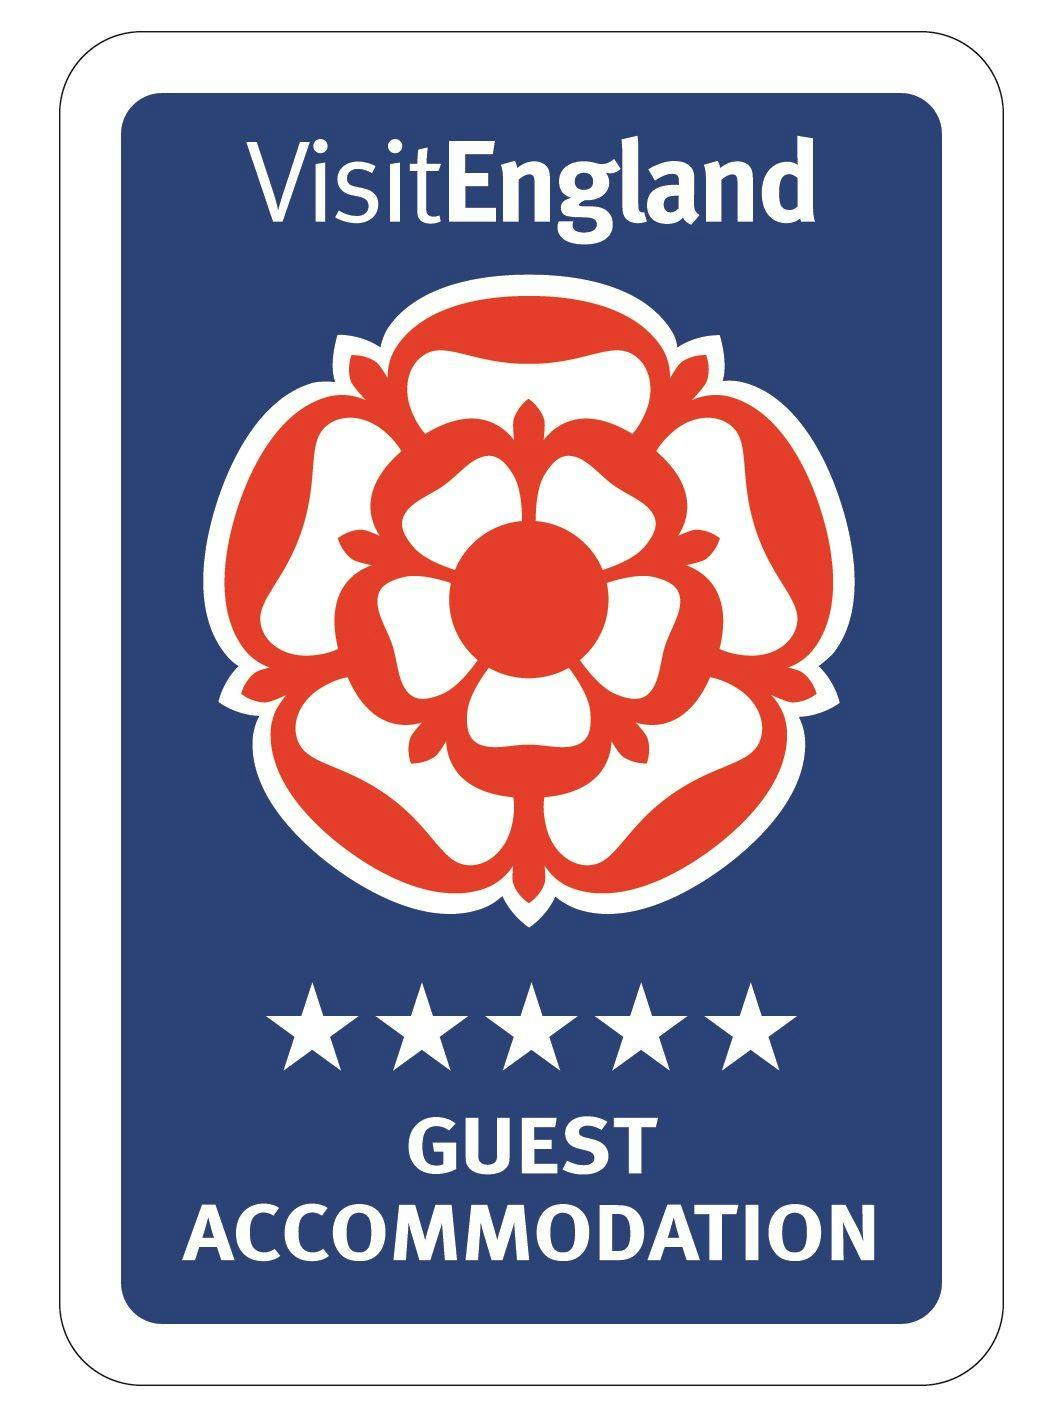 Visit England 5* Guest Accommodation